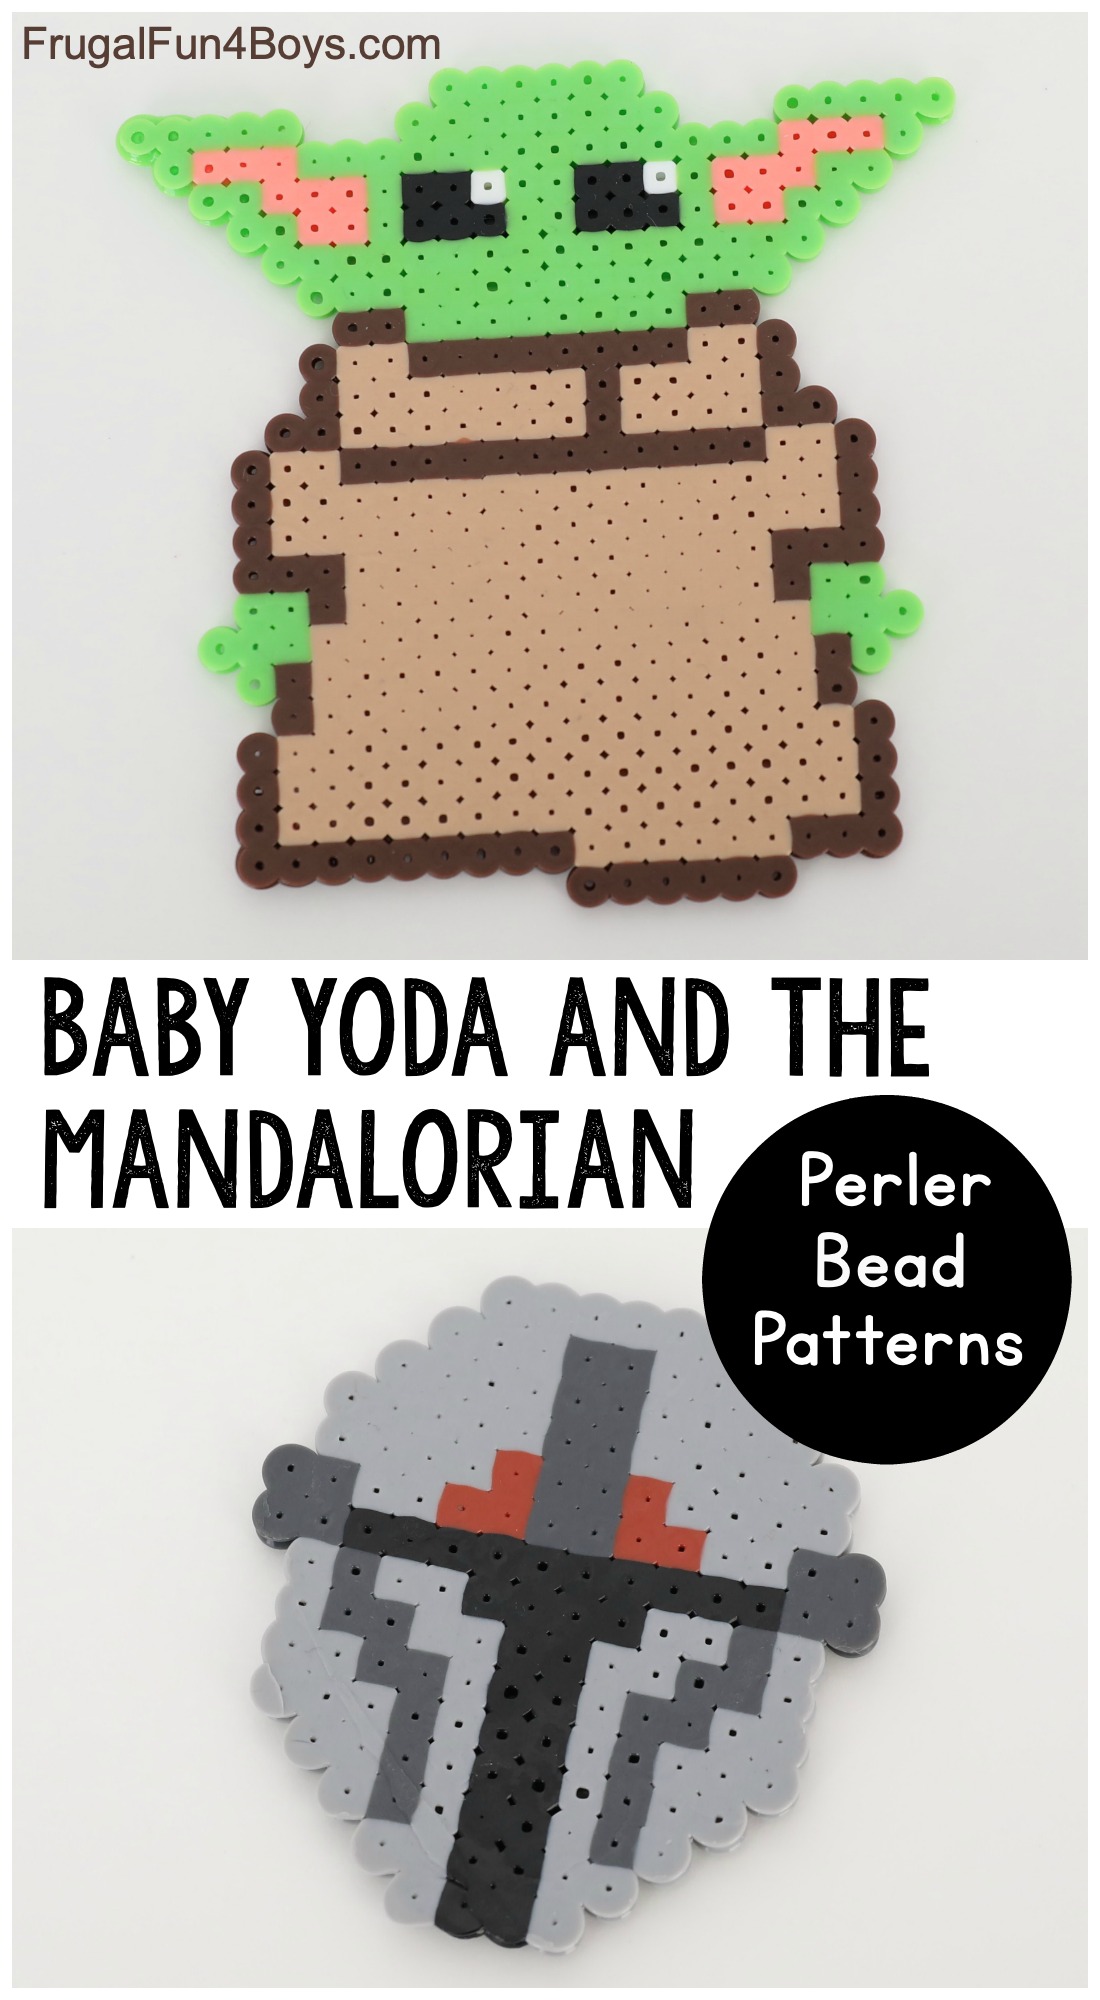 Baby Yoda And Mandalorian Perler Bead Patterns Frugal Fun For Boys And Girls Season 2 of the mandalorian comes out at the end of the month, so get ready for an epic party! baby yoda and mandalorian perler bead